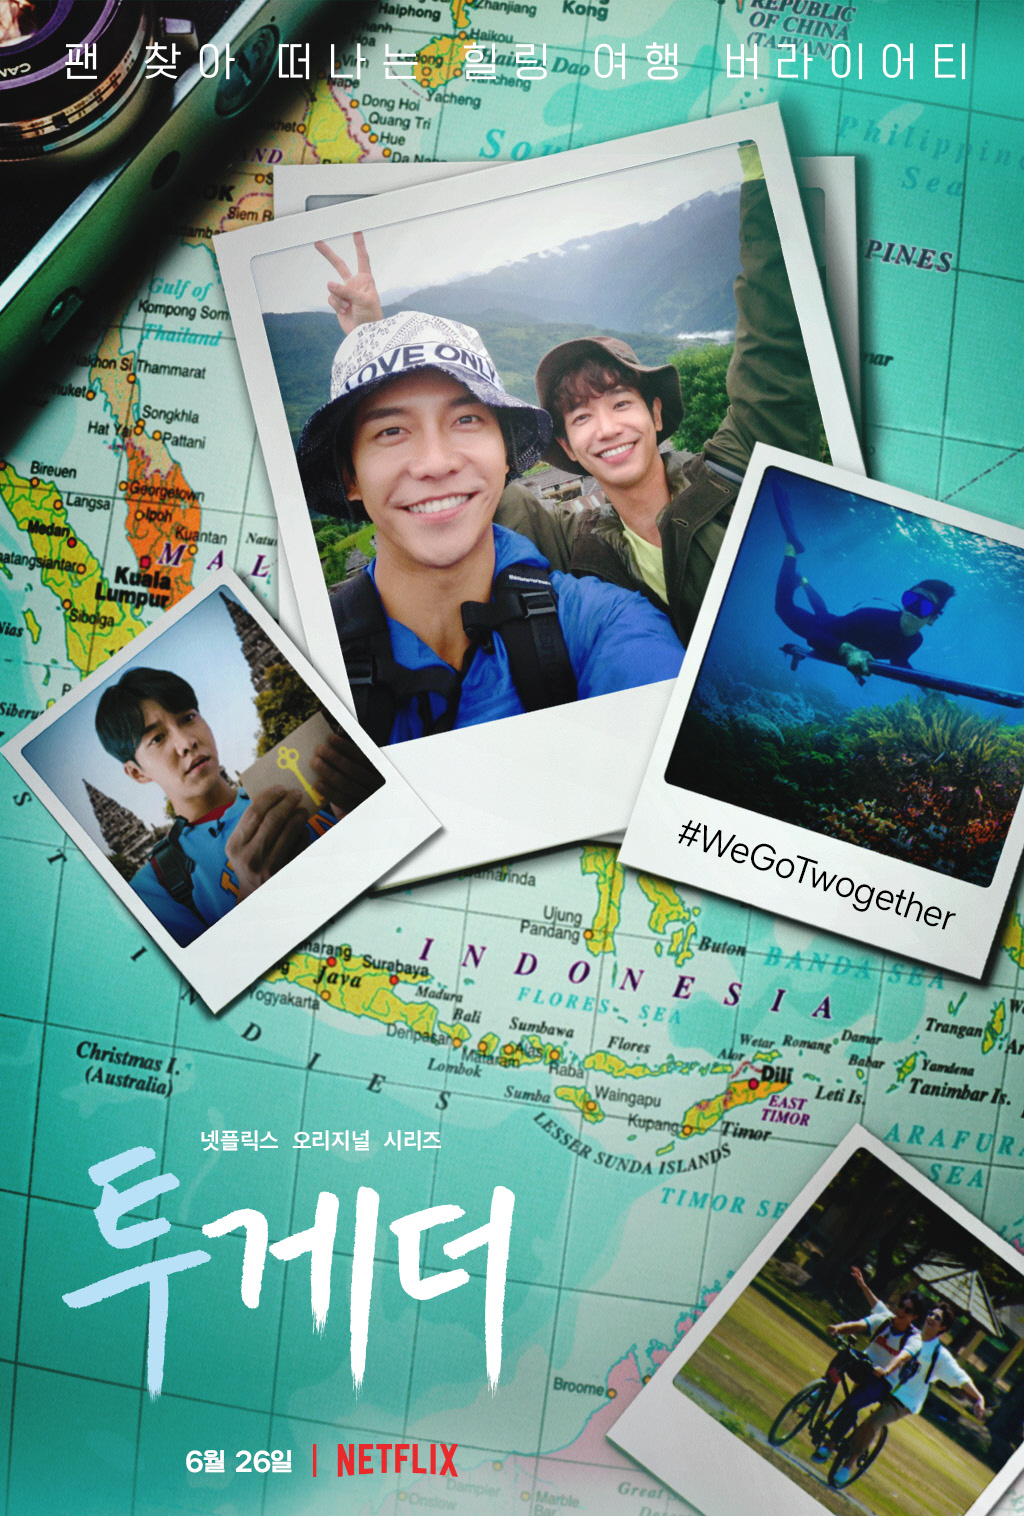 Lee Seung-gi, Ryu Ho, and two other stars from the same age, who are from the language, have released a special poster this summer, the eye-cleaning healing travel variety Twogether, which is going around Asia and looking for fans.The public Poster contains highlights of Twogether Travel.The warm selfie, Lee Seung-gi, who solves the mystery of the production team, Ryu Ho, who is in charge of harpoon fishing, and two men on a couple bicycle are all captured in various Travel magazines.The Polaroid Corporation photos, filled with memories of Lee Seung-gi and Ryu Iho on the unfolding World leadership, reminds both of the memories of the two men and the pleasure of Travel to all viewers who have to postpone the travel for a while.Twogether follows a month-long travel to Seoul through Pocara and Kathmandu in Indonesia, Yuyakarta, Bali, Bangkok, Thailand, Chiang Mai and Nepal.Lee Seung-gi and Ryu I-hos Summertime are full of net travel that local fans have recommended.The lively Travel that makes you feel the European of your fans by jumping into the life of a local fan, not a Travel that follows a famous sightseeing course. Cho Hyo-jin PD, who introduced Twogether, made a Travel route full of fans desire that the beloved star leave with the best memories in his Europe.The production team did not miss the various cultures that can be experienced in various Europes, as well as the high-level missions that two men have to go through to meet the fans who made the Travel route.The two actors who are embarrassed every time by the wrong mission, but look forward to meeting with the fans and enthusiastically work on the mission make a smile.In addition, the fantastic scenery of various Europes that can be seen in the summertime of two people gives cool sights and healing to all those who miss Travel.Twogether, which adds expectations to the special poster that stimulates the desire for Travel, will be released to all worlds on Netflix only on June 26th.